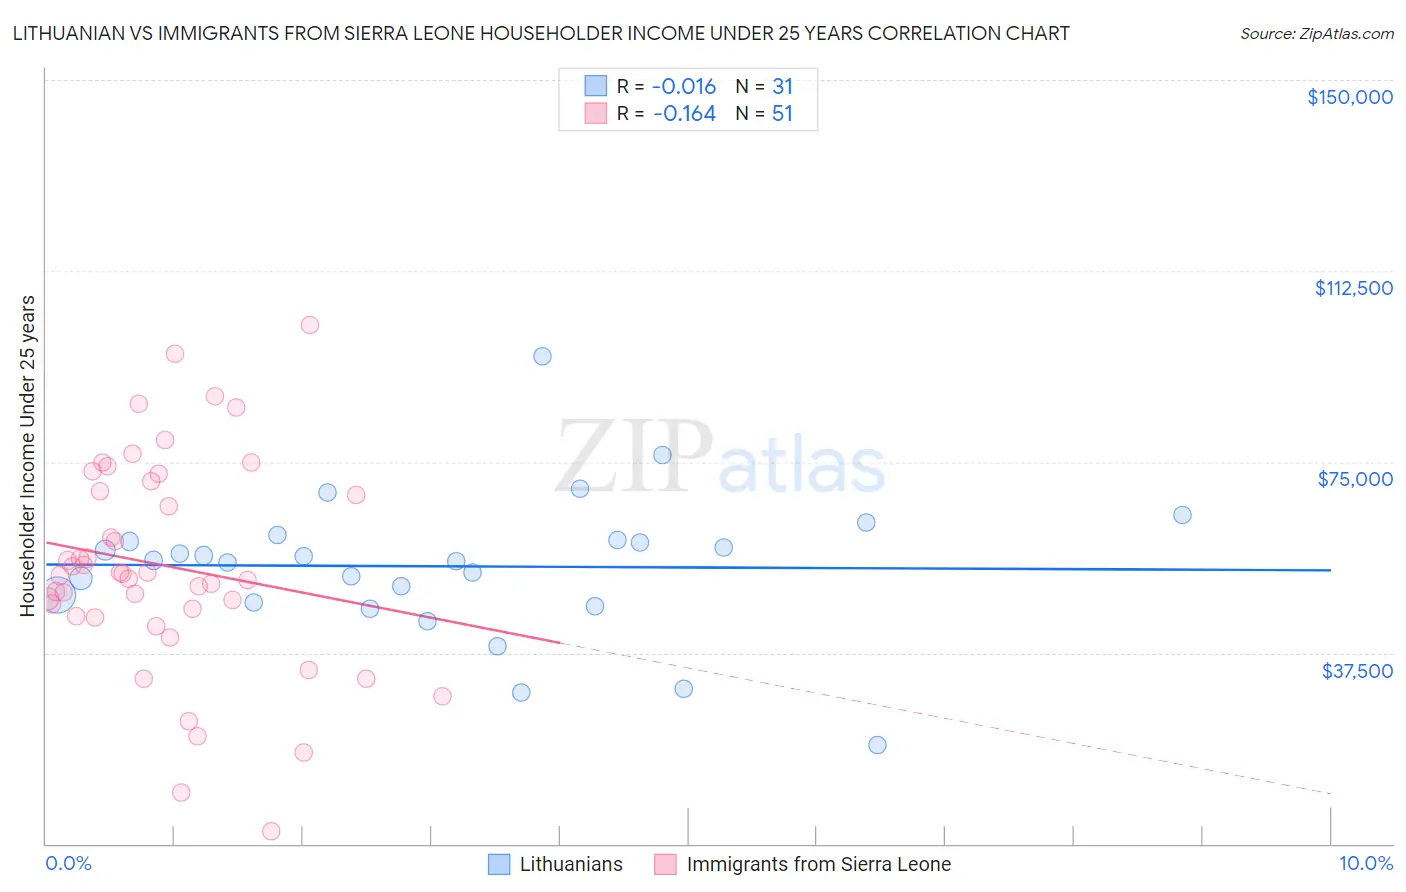 Lithuanian vs Immigrants from Sierra Leone Householder Income Under 25 years